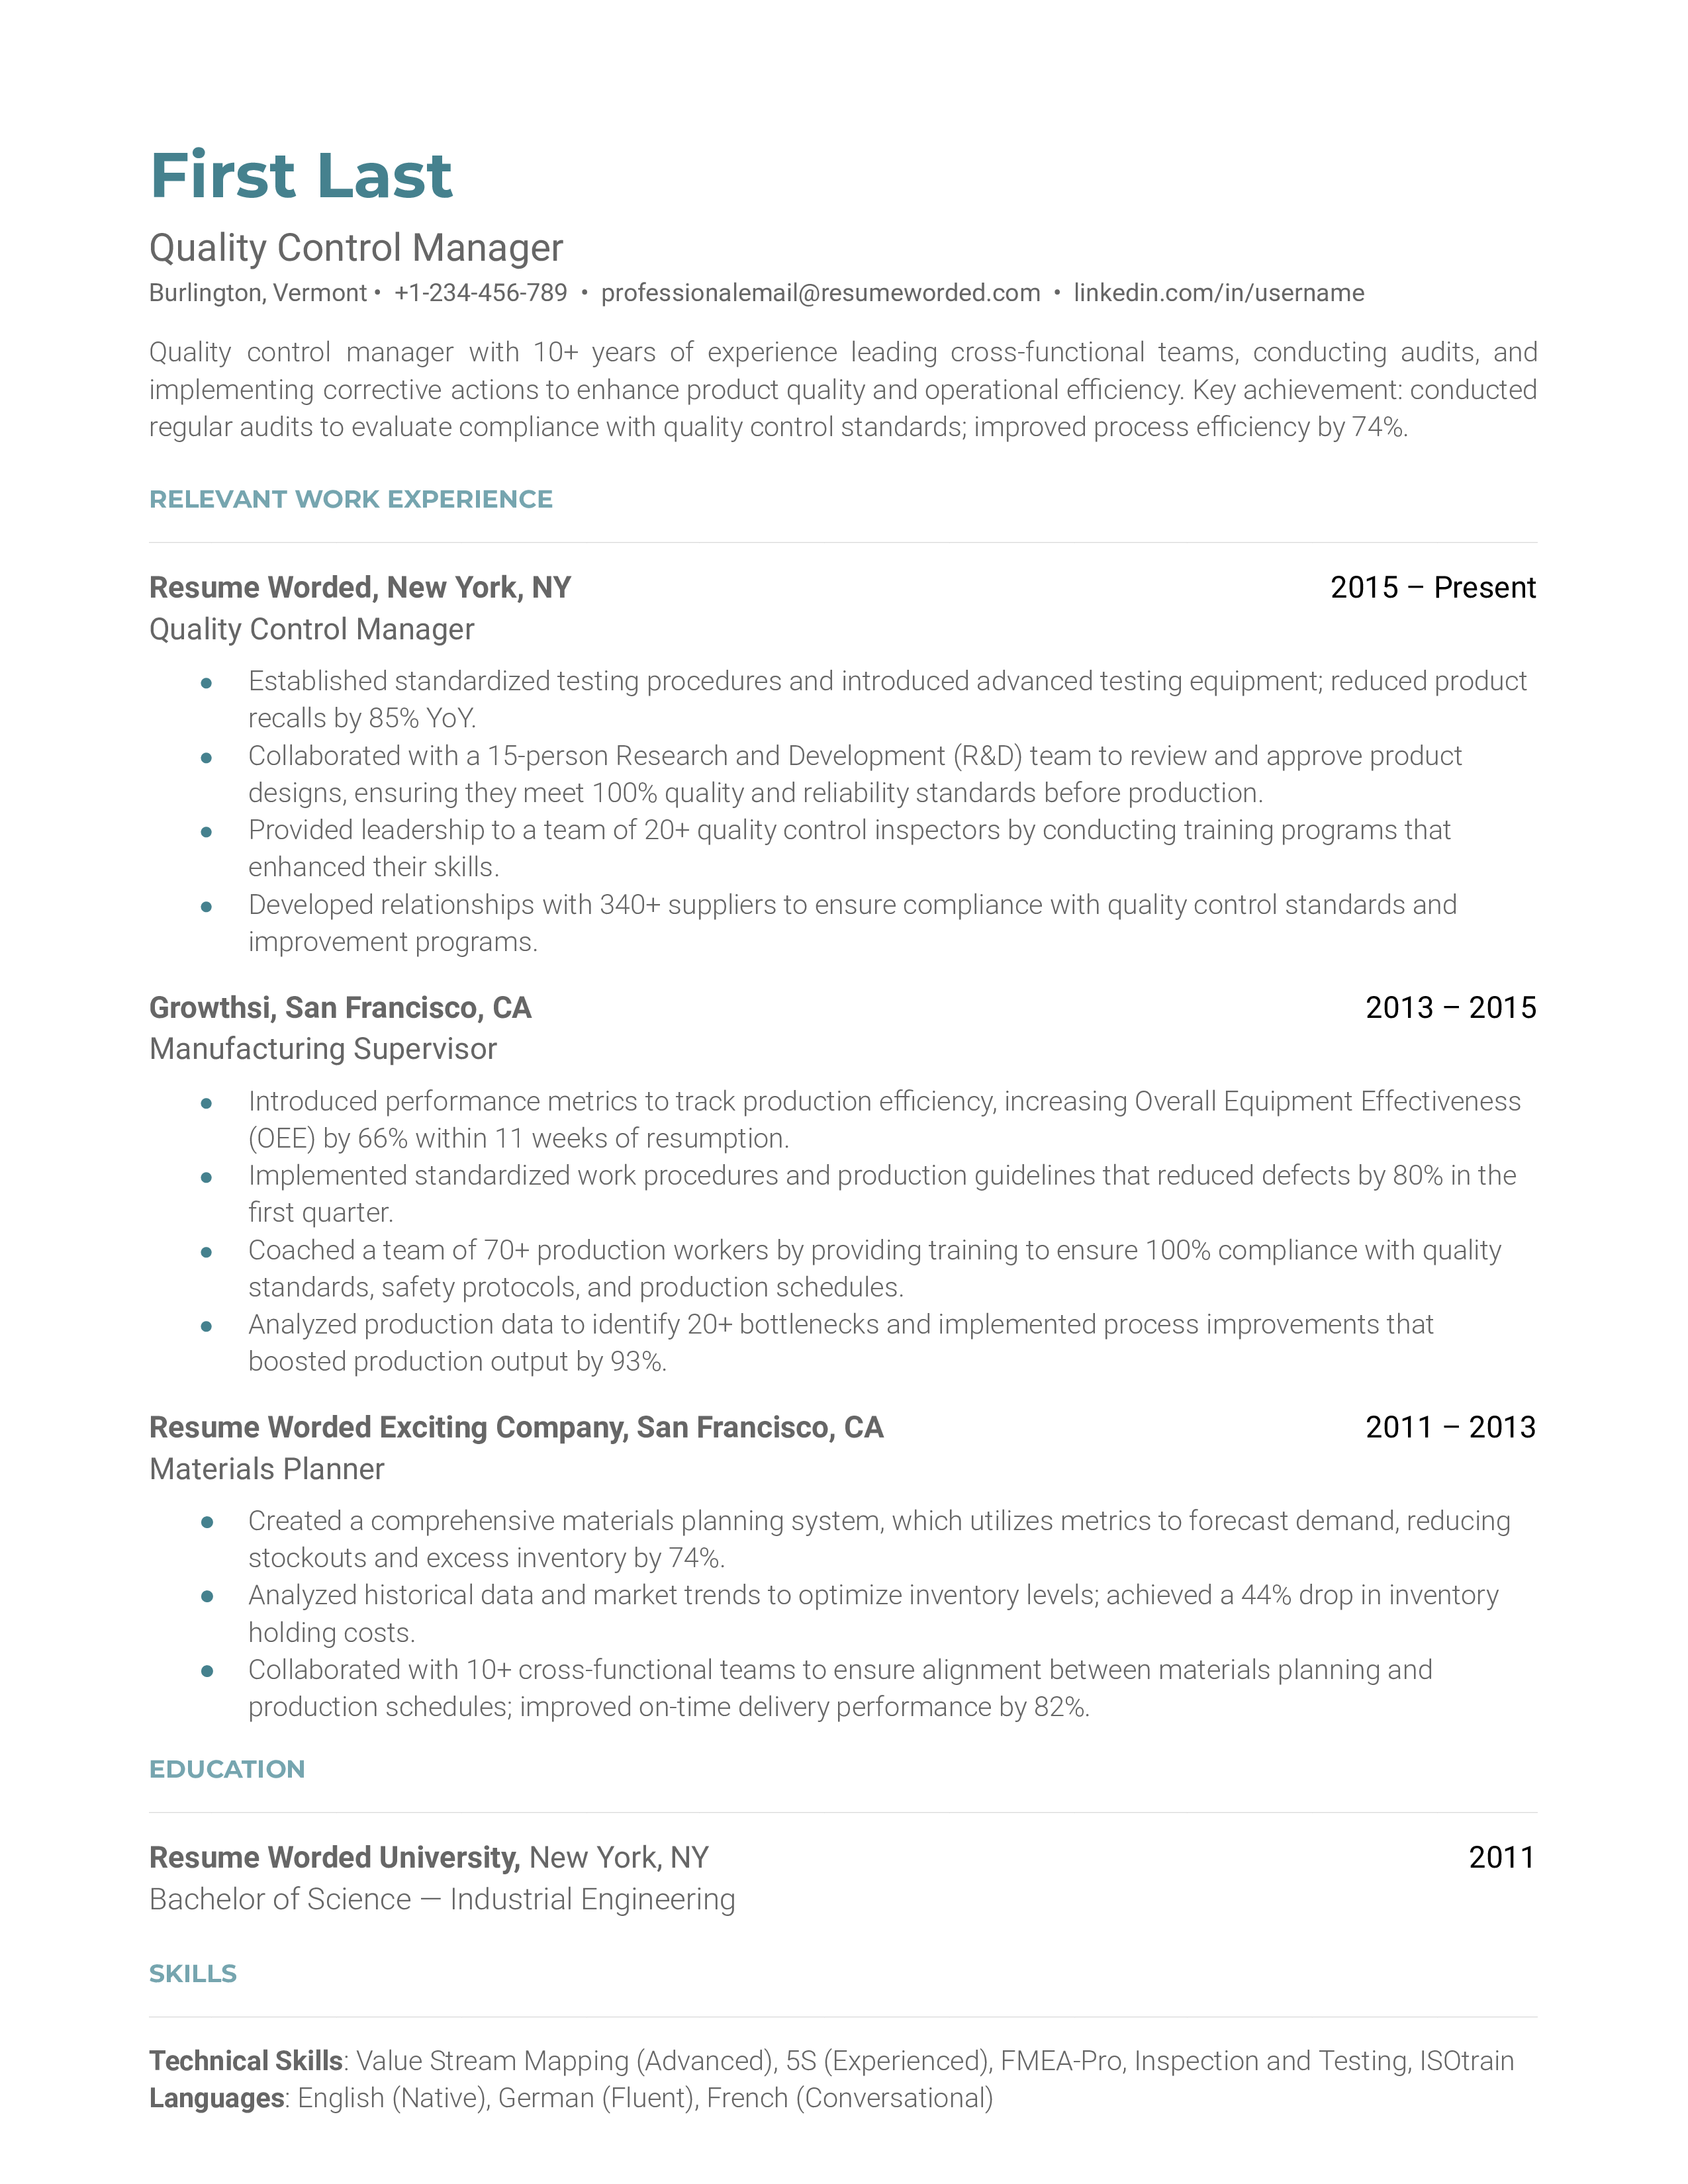 Resume of a Quality Control Manager showcasing relevant certifications and communication skills.